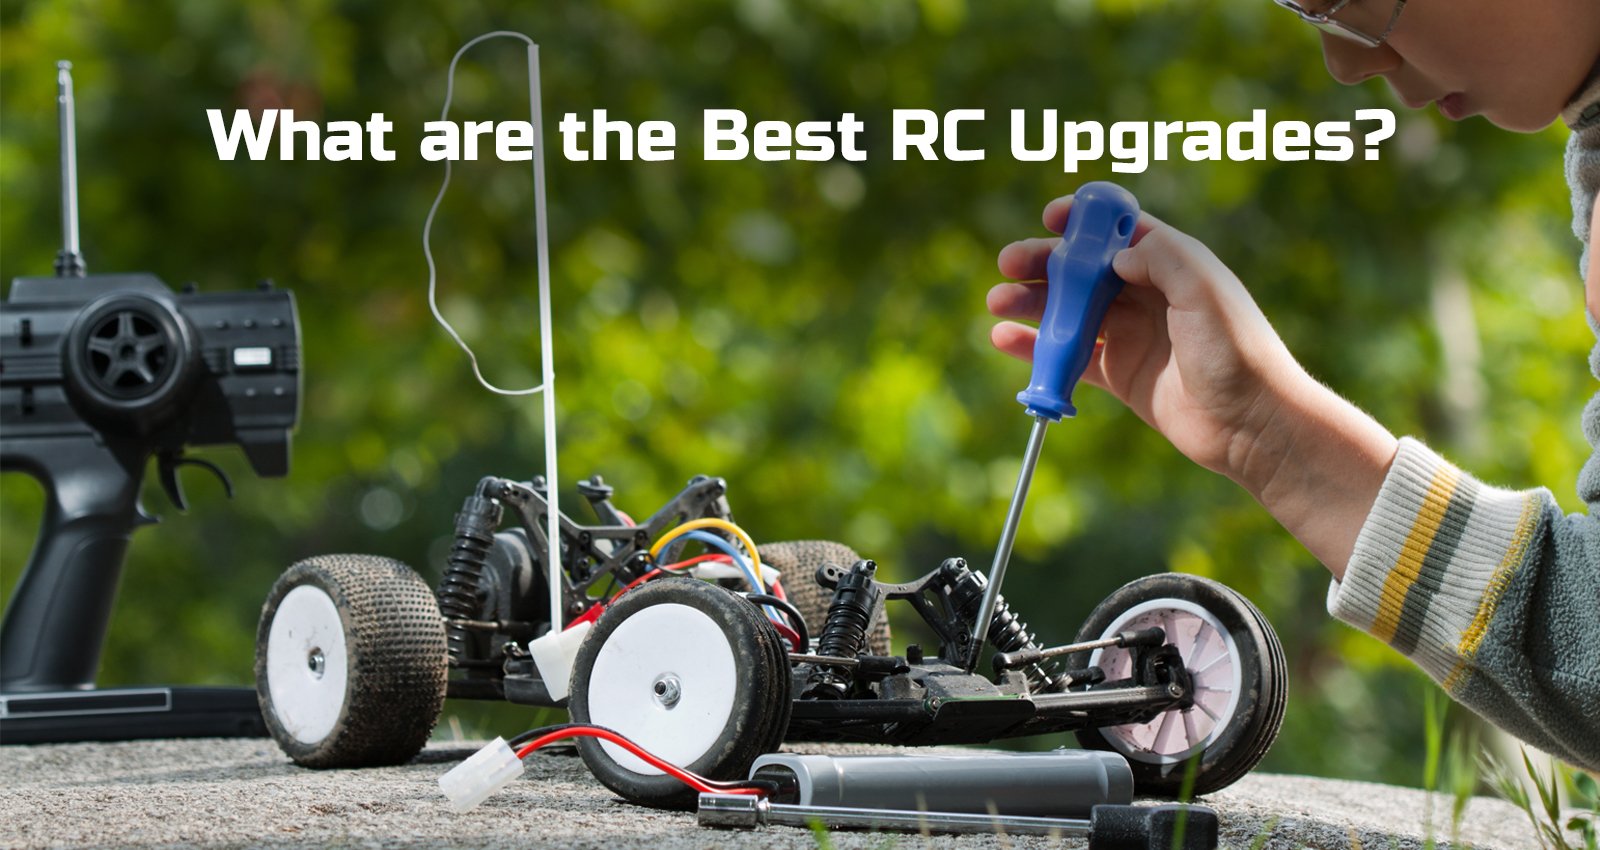 How to RC Tips and Tricks for Radio Control